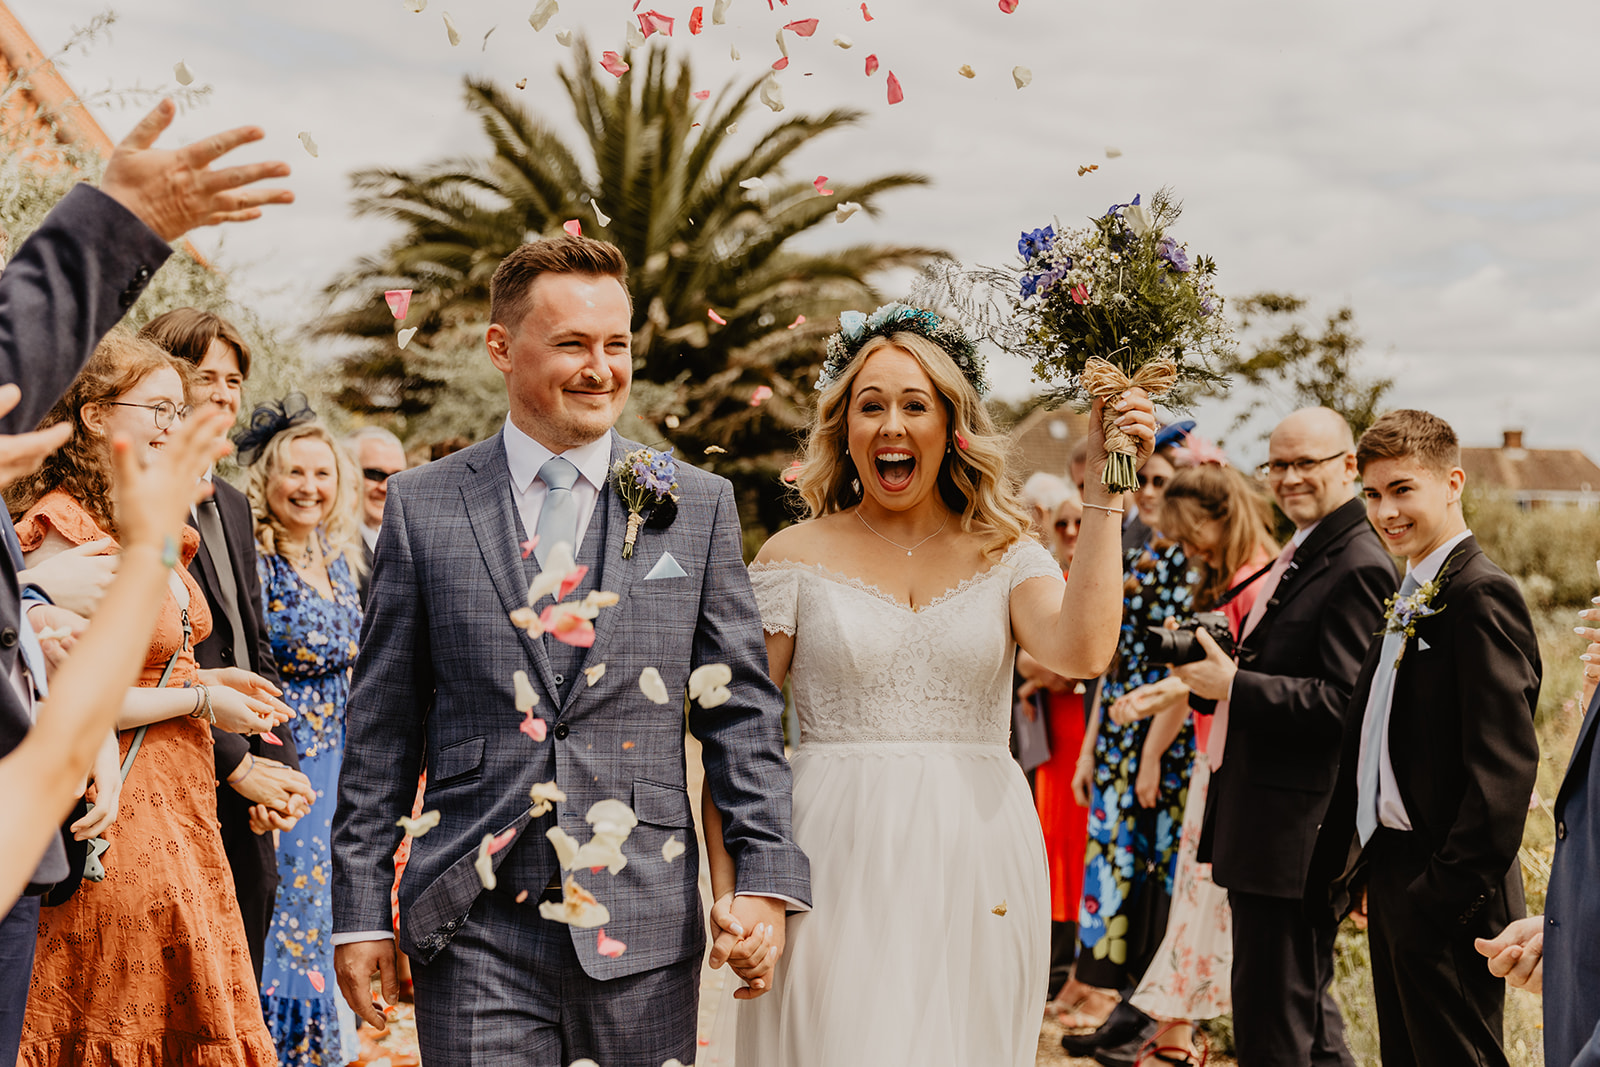 Bride and groom under confetti at Field Place Wedding Worthing, Sussex. By OliveJoy Photography.